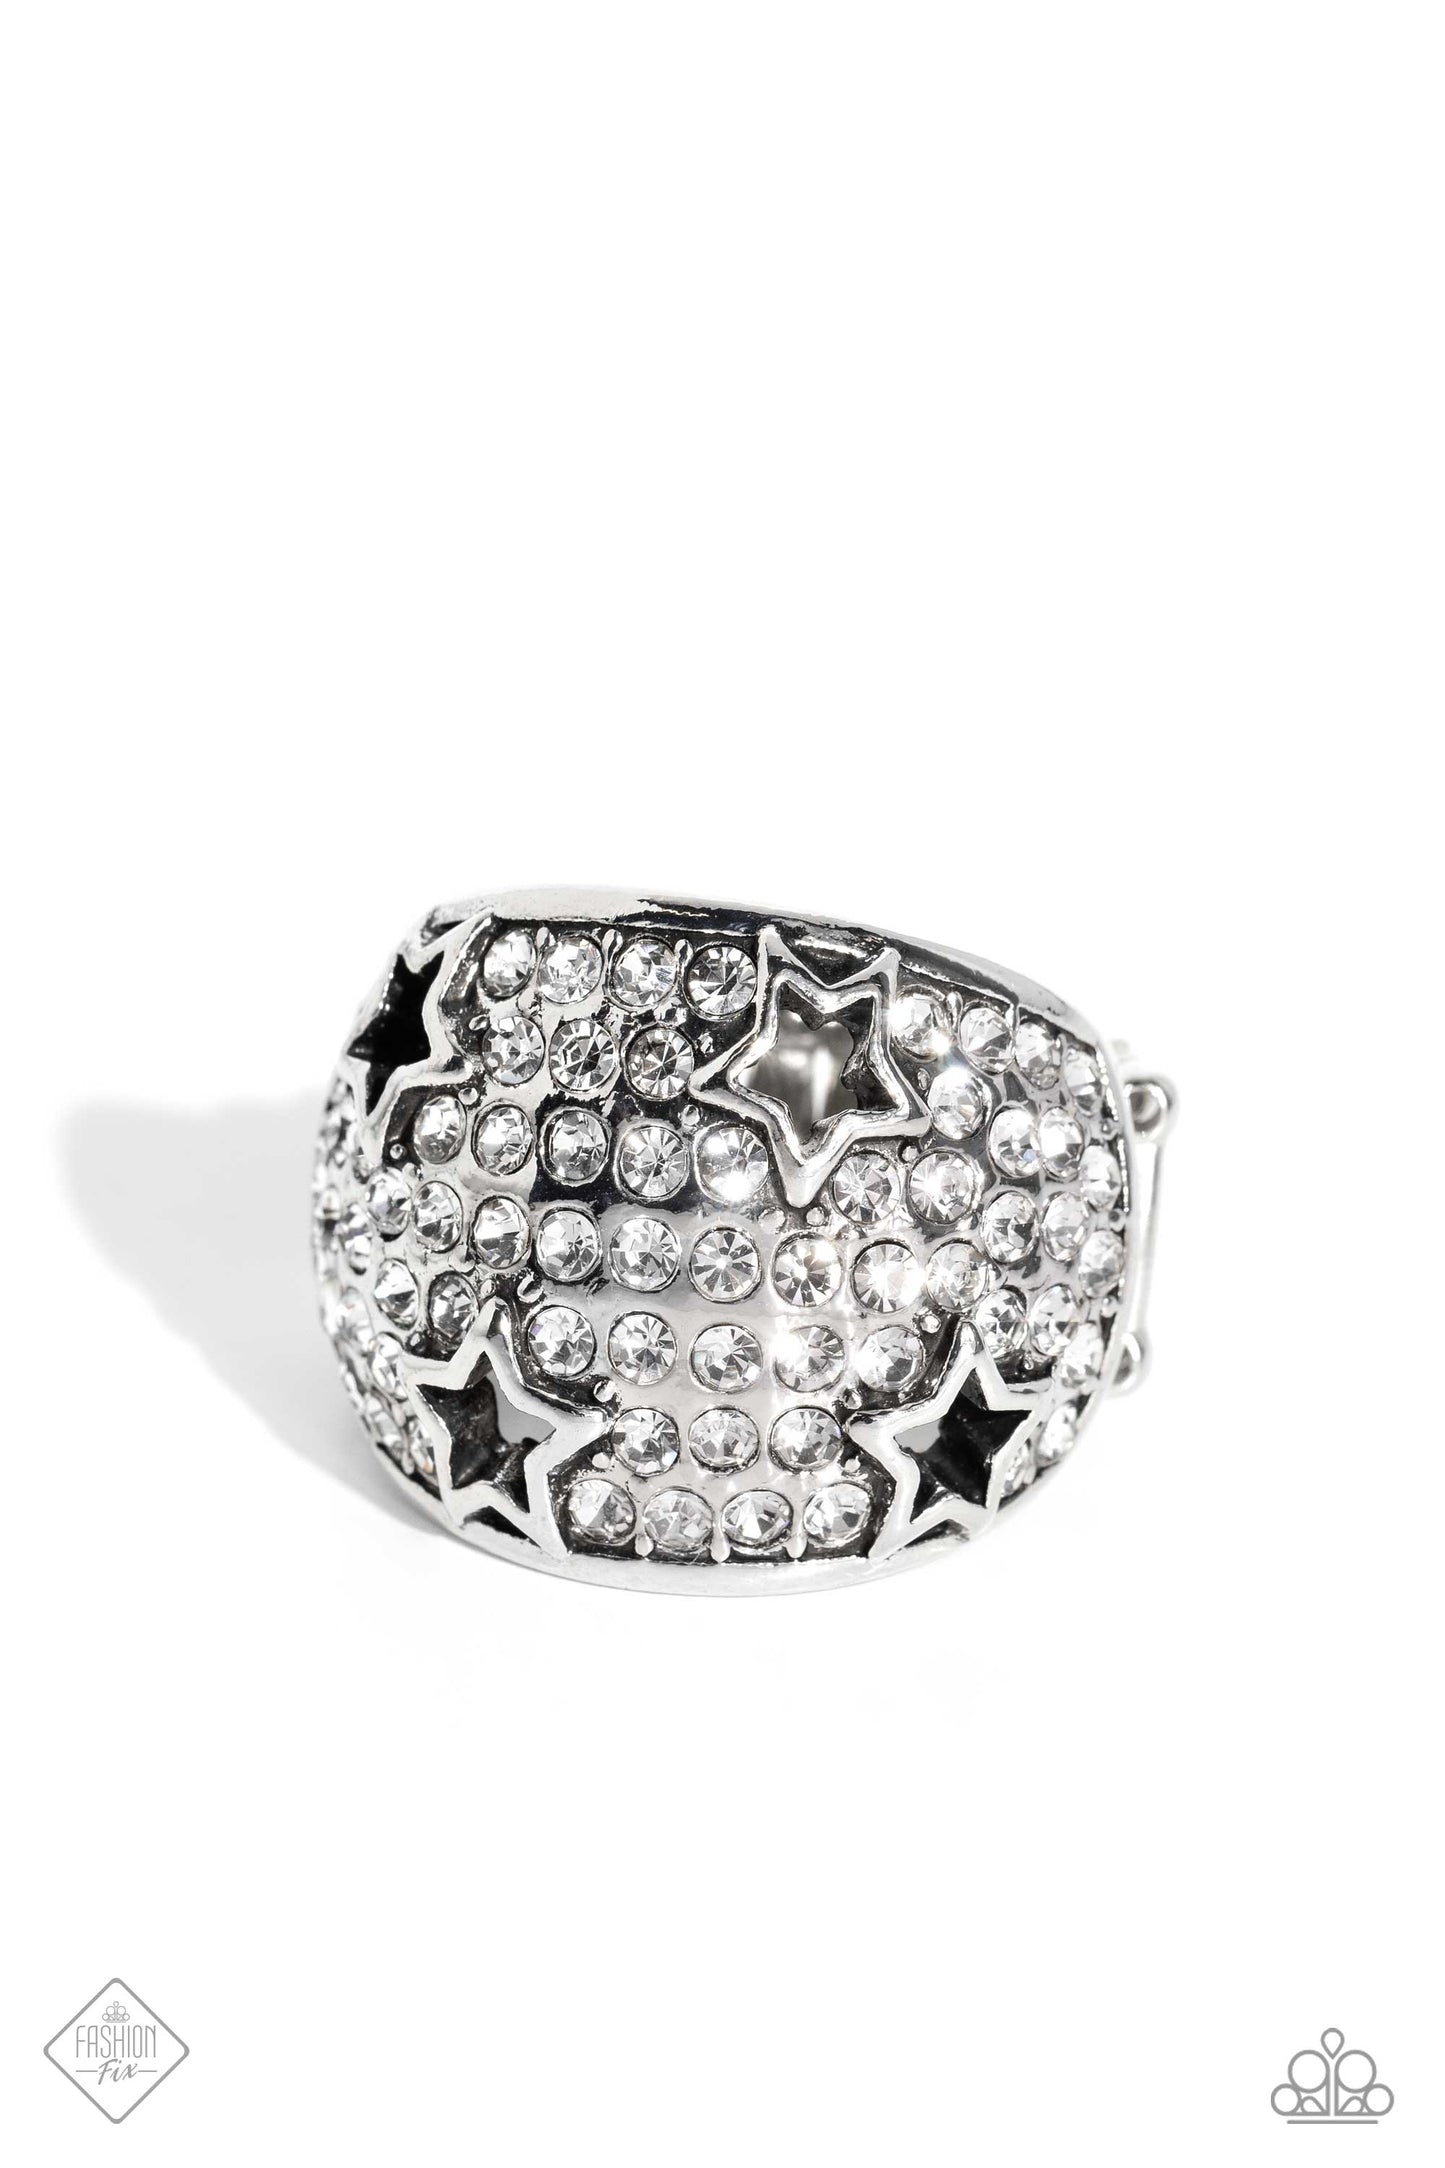 Reliable Radiance - Fashion Ring - Paparazzi Accessories - Row after row of incandescent white rhinestones stack into a dazzling display across a beveled silver band. Silver star silhouettes haphazardly dot across the dazzling surface, creating a commanding statement piece. 